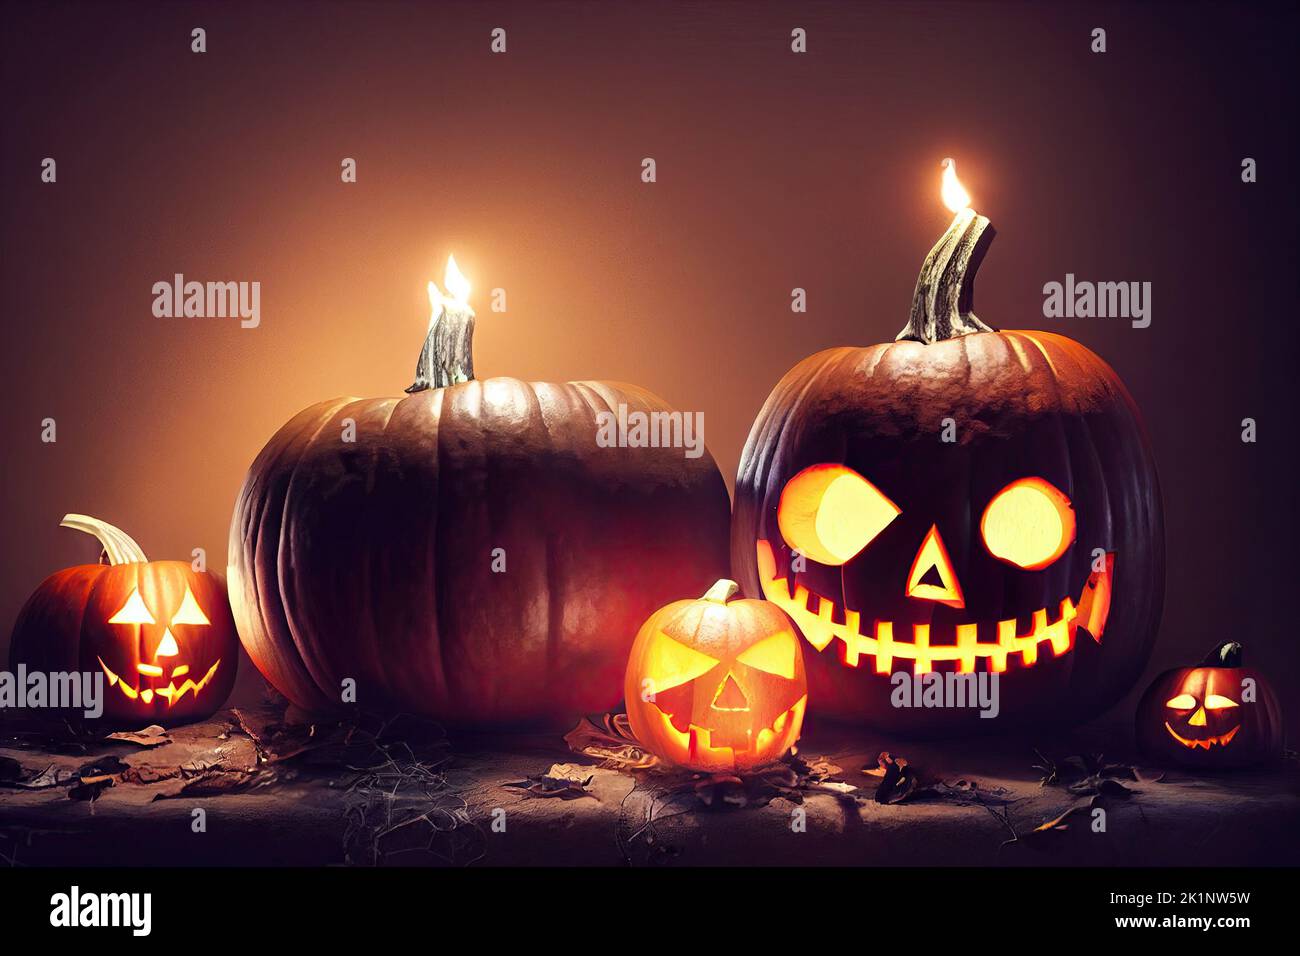 Halloween with carved pumpkins on a table in the dark with candles. Halloween pumpkins lit by candlelight at night. 3D illustration and fantasy Stock Photo